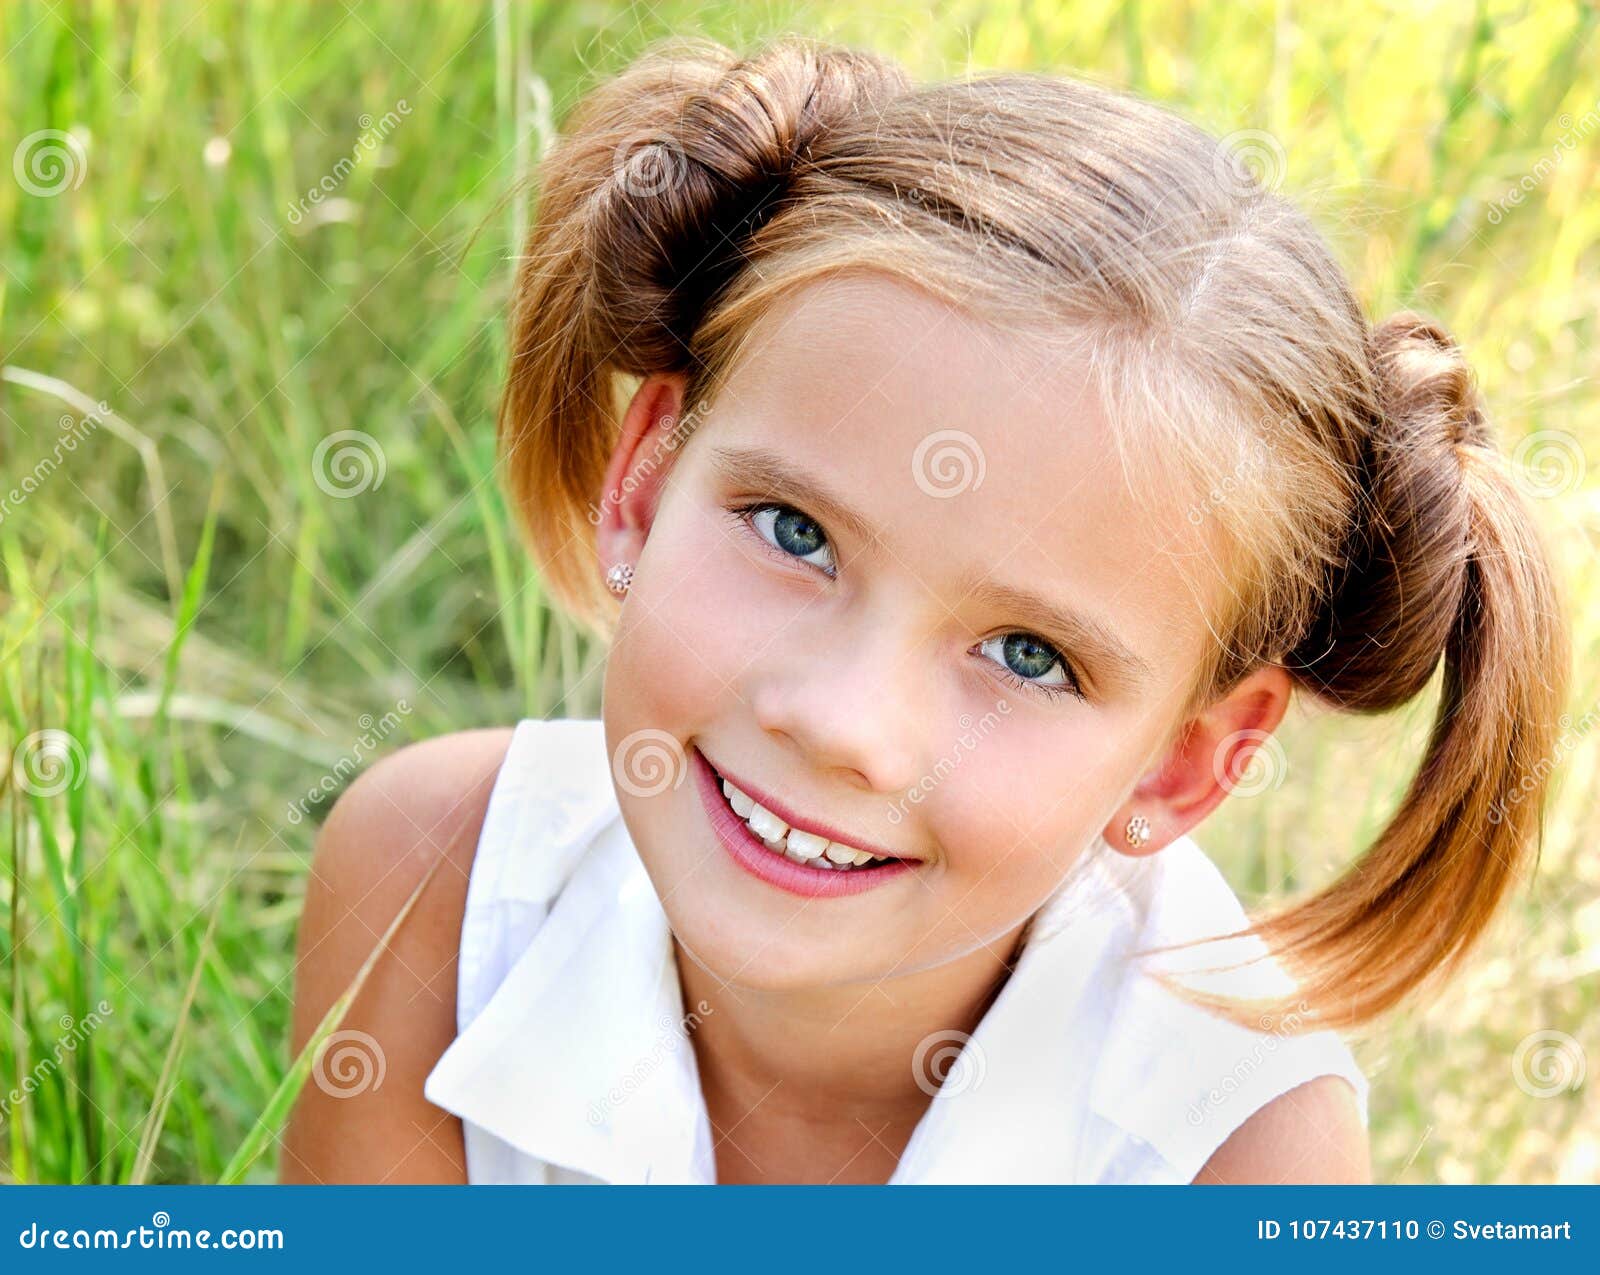 Portrait of Adorable Smiling Little Girl in Summer Day Stock Photo ...